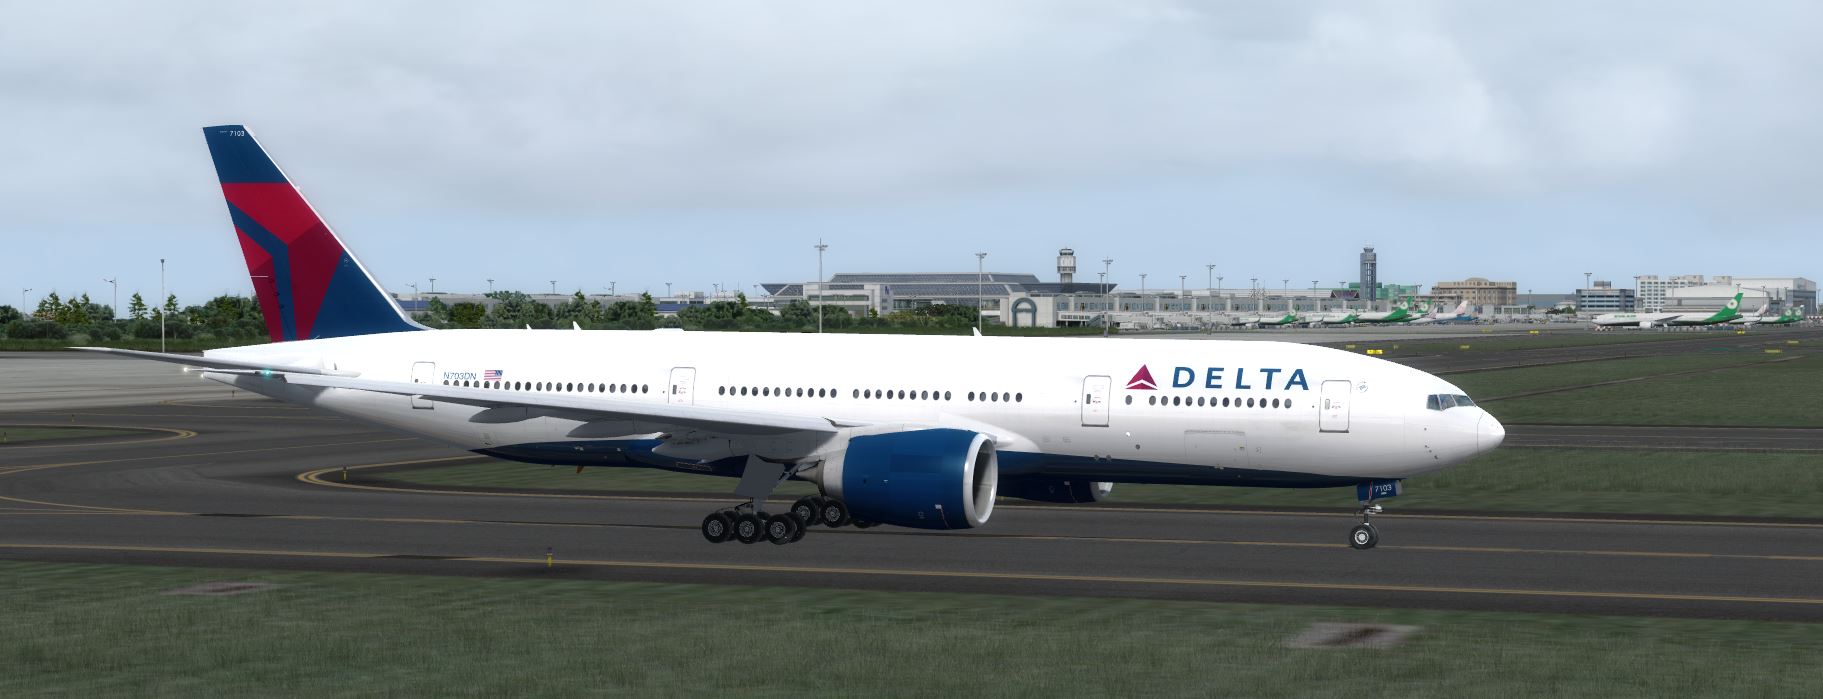 B777-200 Delta Airlines Standard Livery-5033 